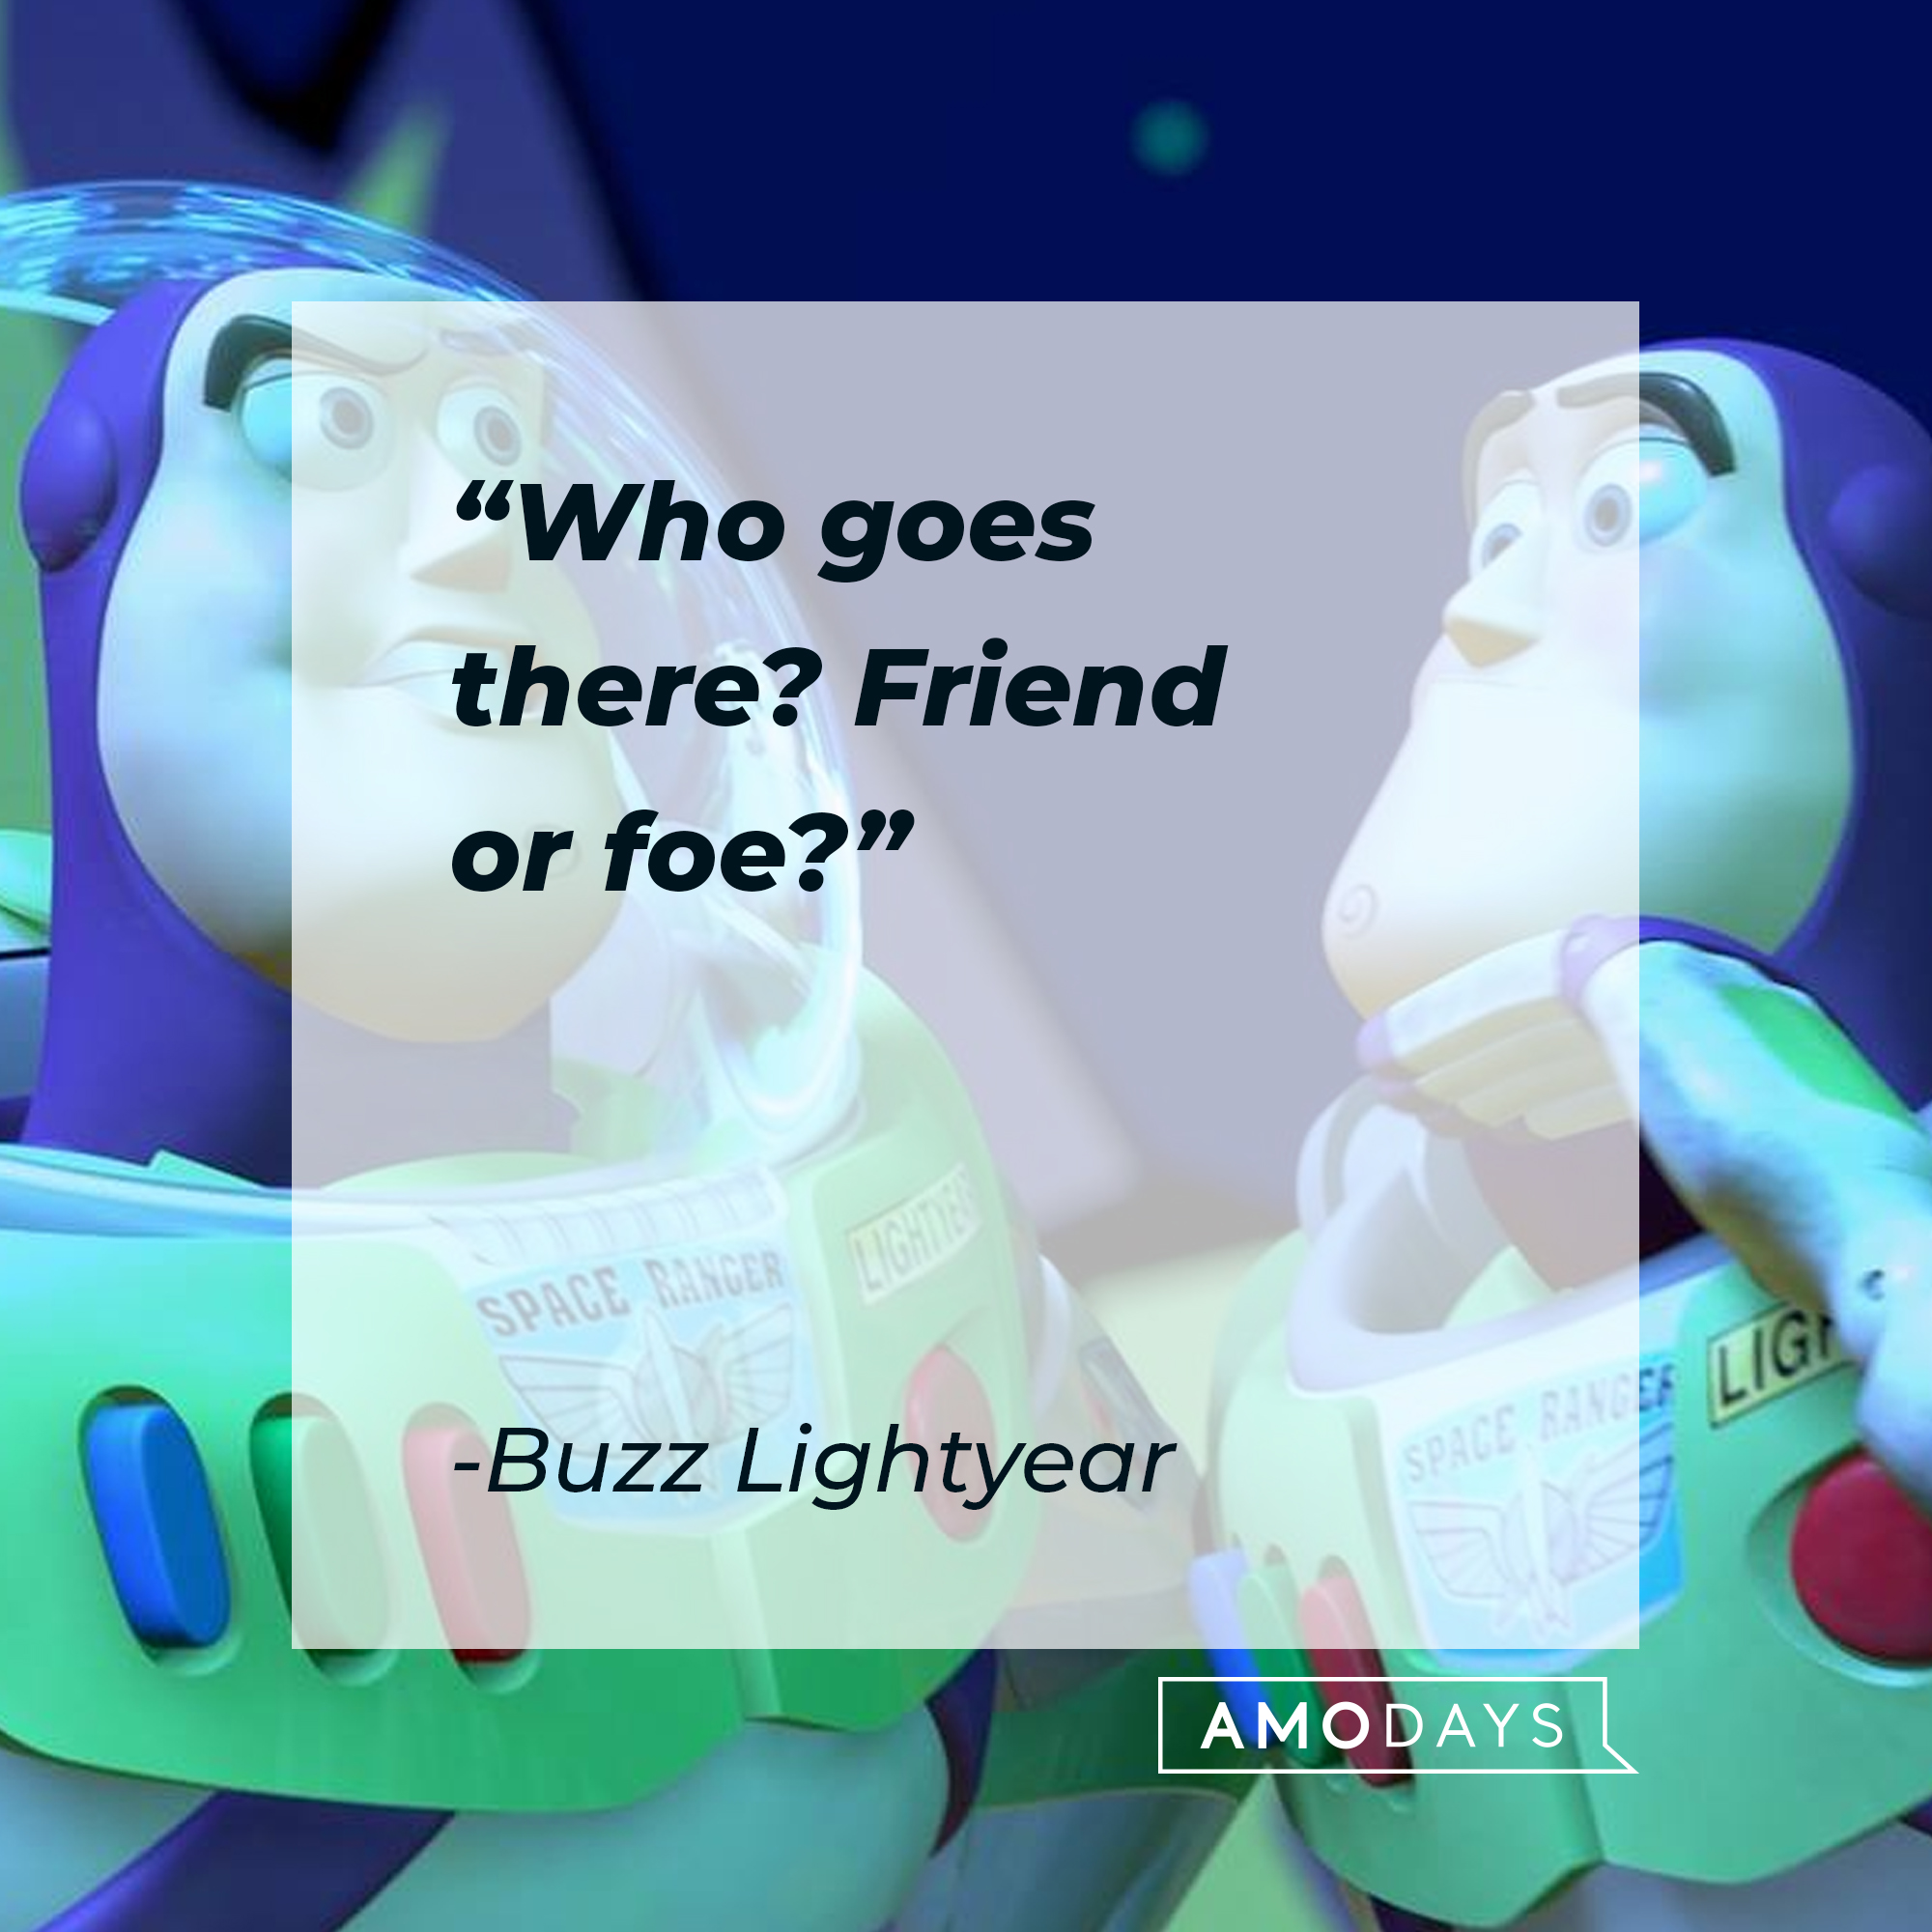 Buzz Lightyear's quote: "Who goes there? Friend or foe?" | Source: Facebook/BuzzLightyear